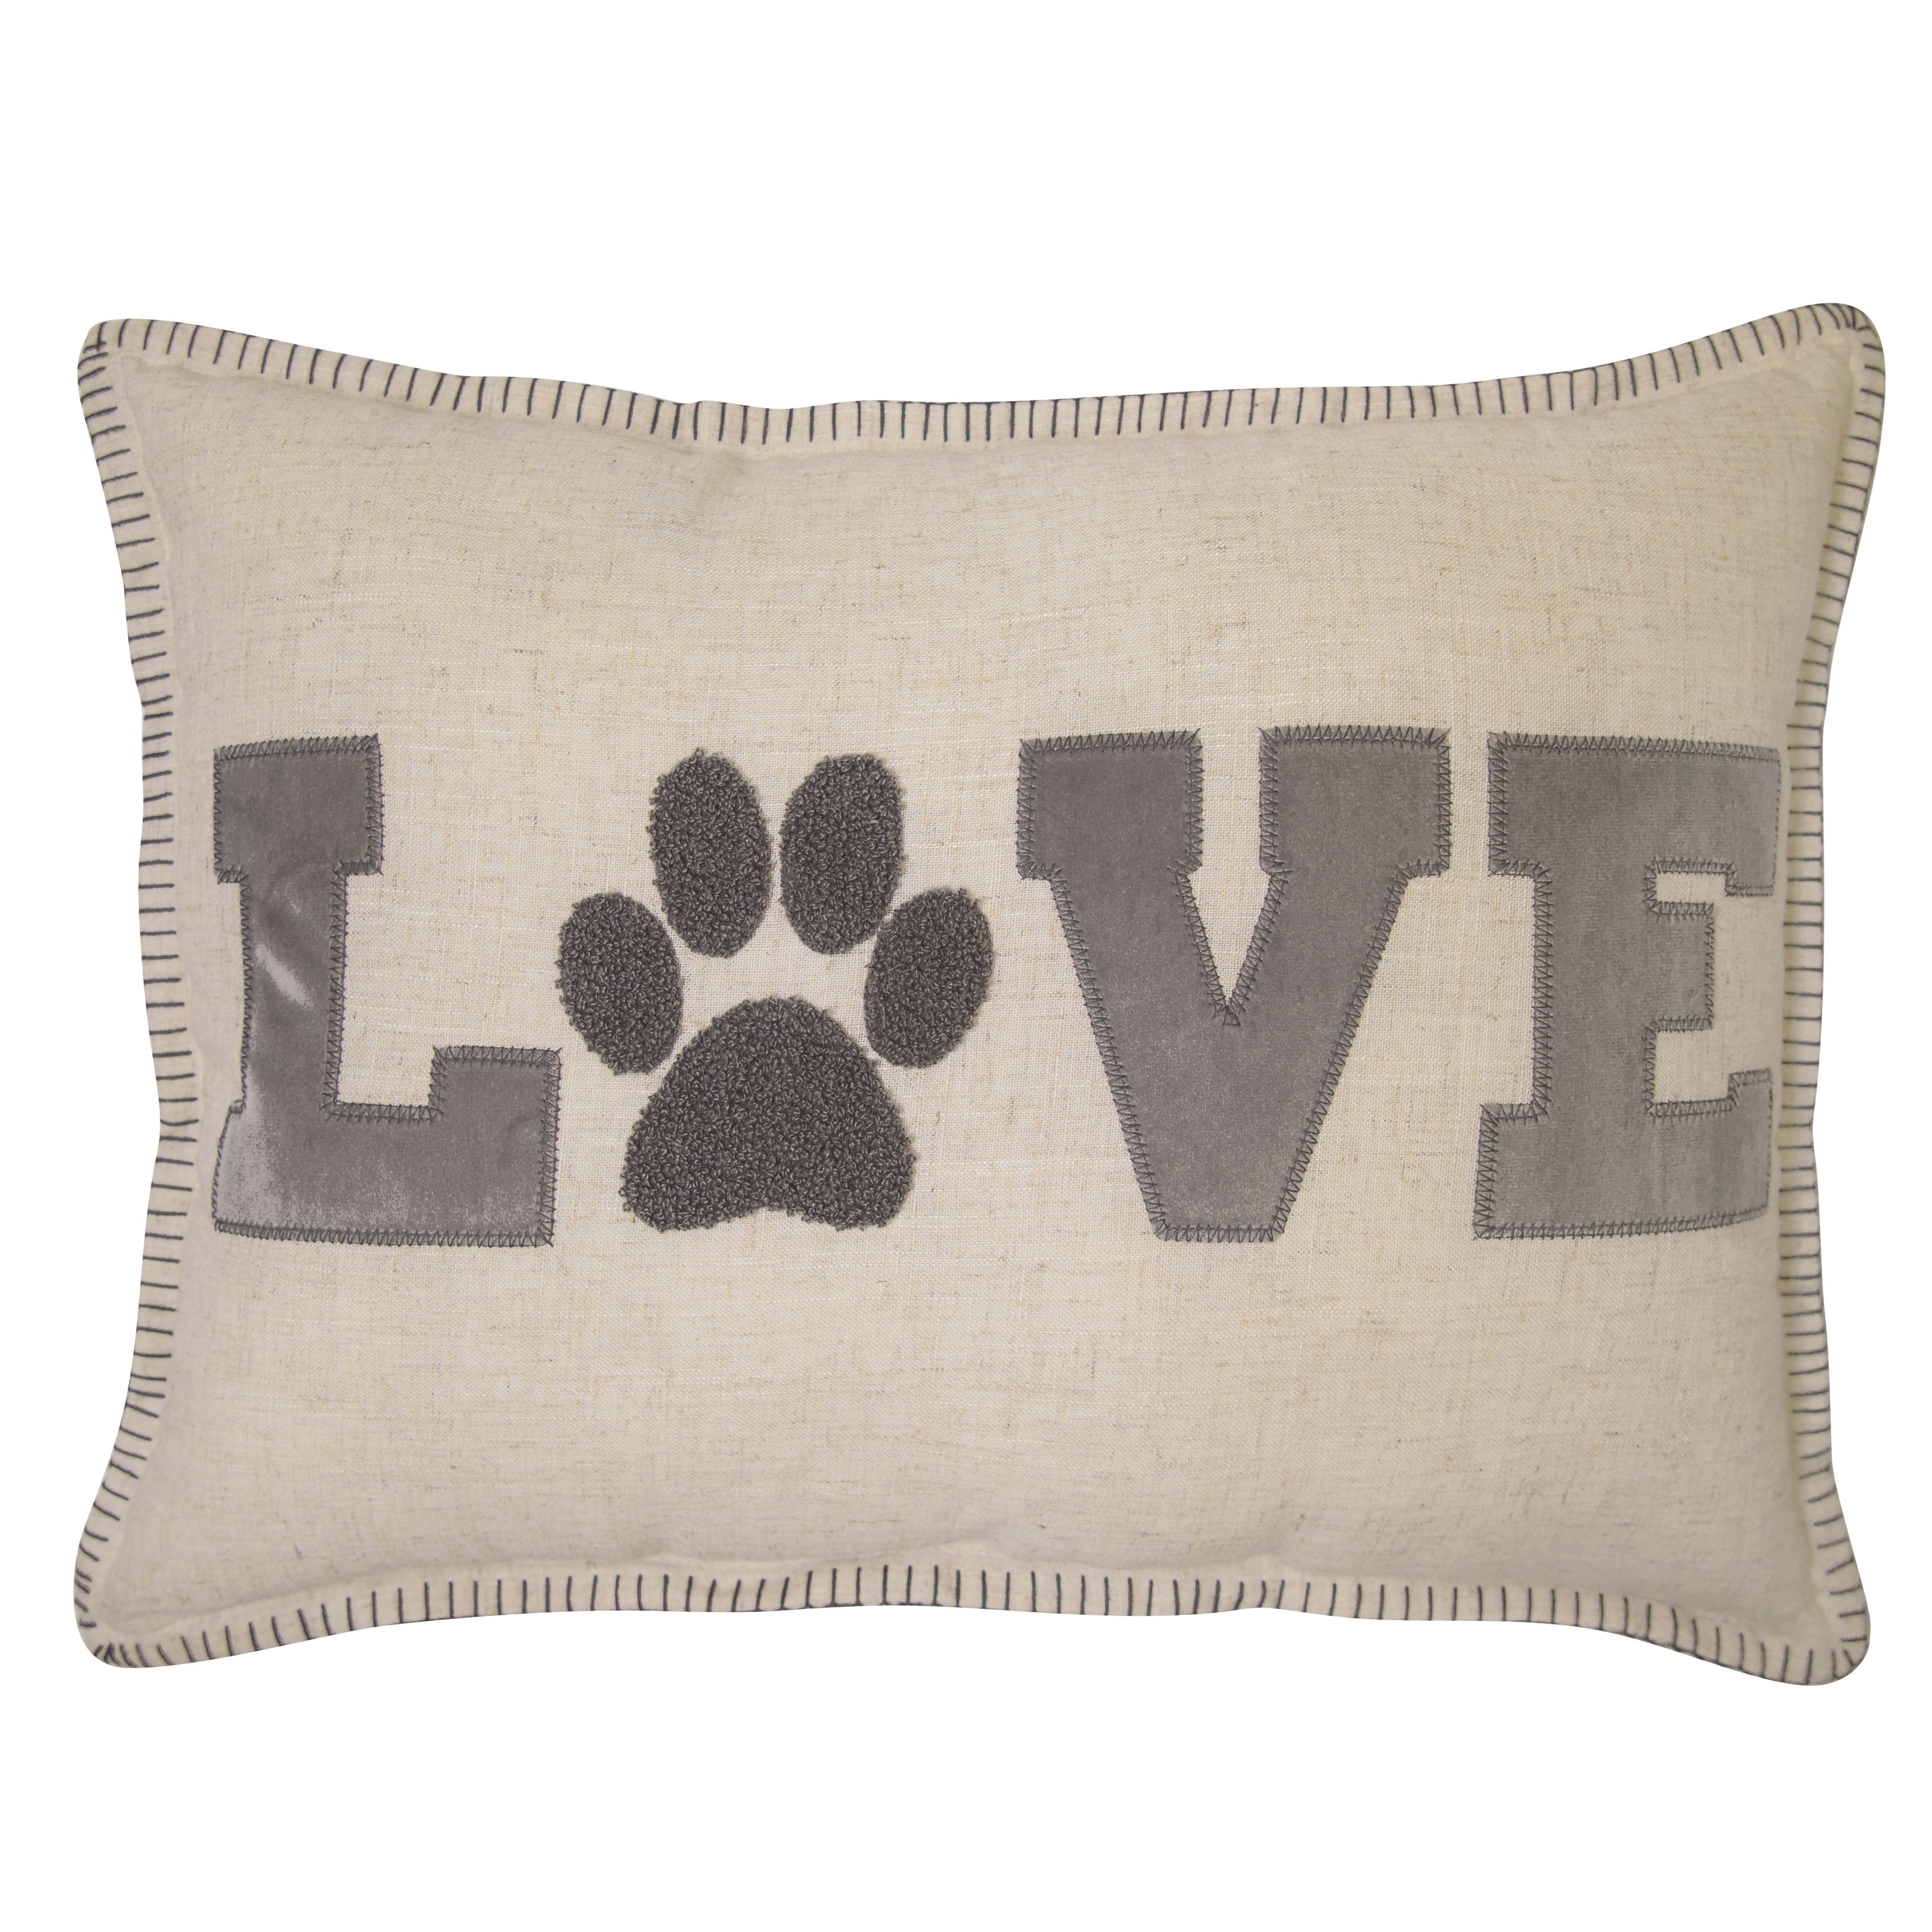 Gift for Her Gift for him My Goldendoodle Leaves Paw Prints On My Heart Pillow Case Throw Pillow Gift for Dog Lover Decorative Pillow